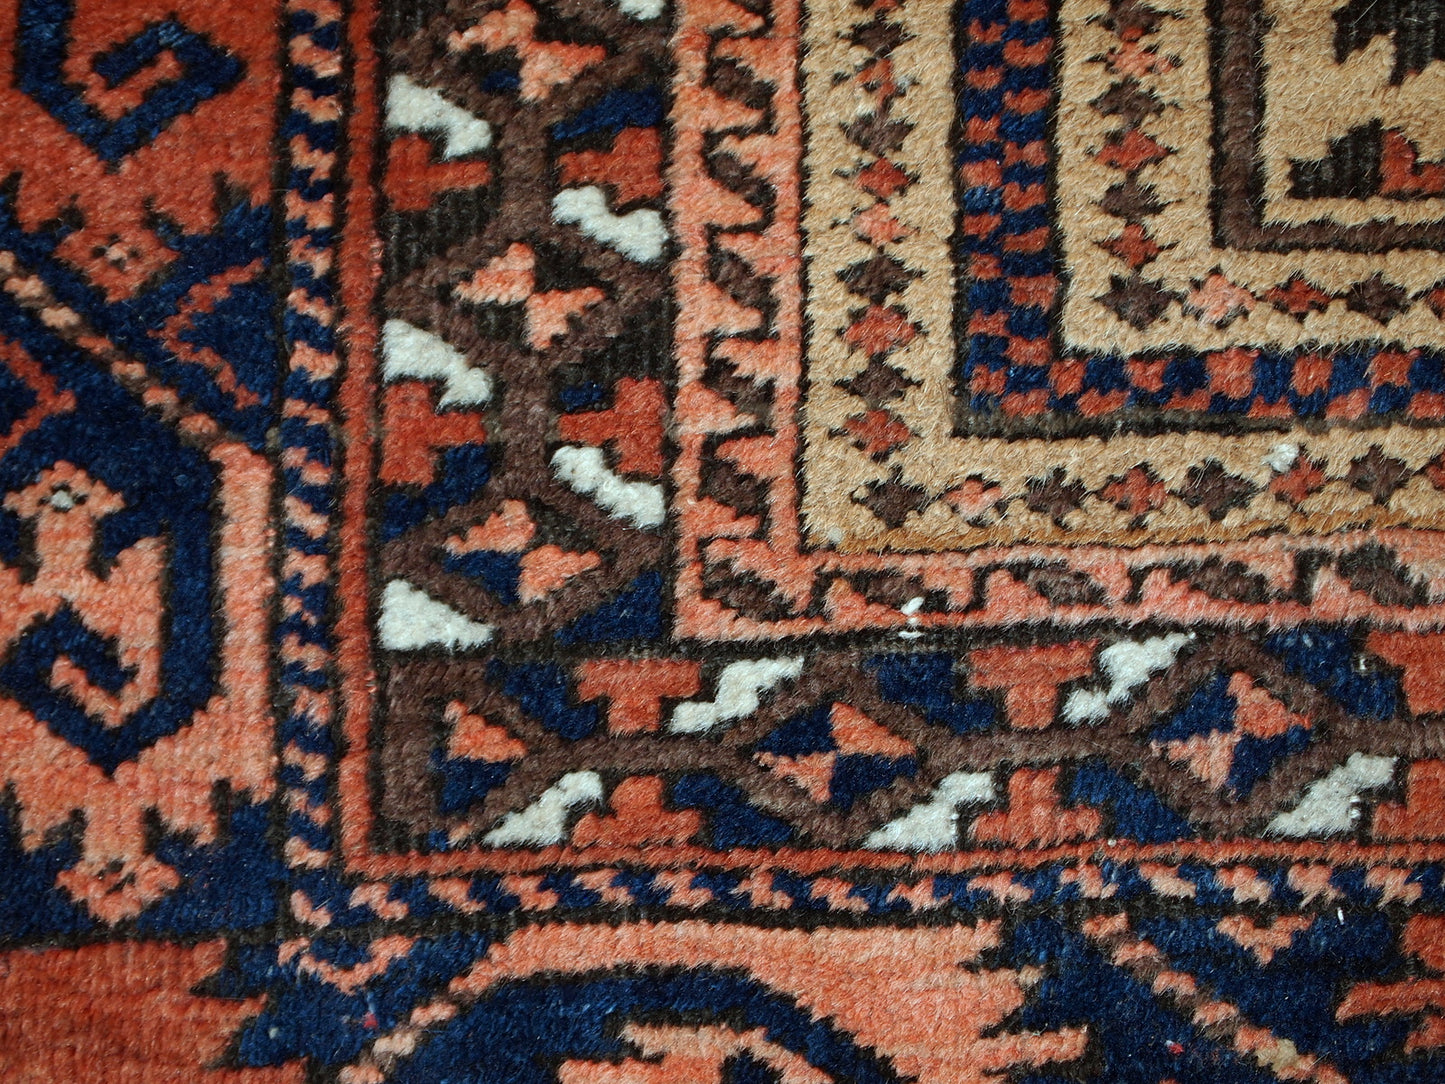 This prayer Baluch rug is in original condition, it has some little age wear and old restoration from the back. Light shade of brown on the field and red decorations. The border has beautiful tribal design in navy blue, pink and red. 